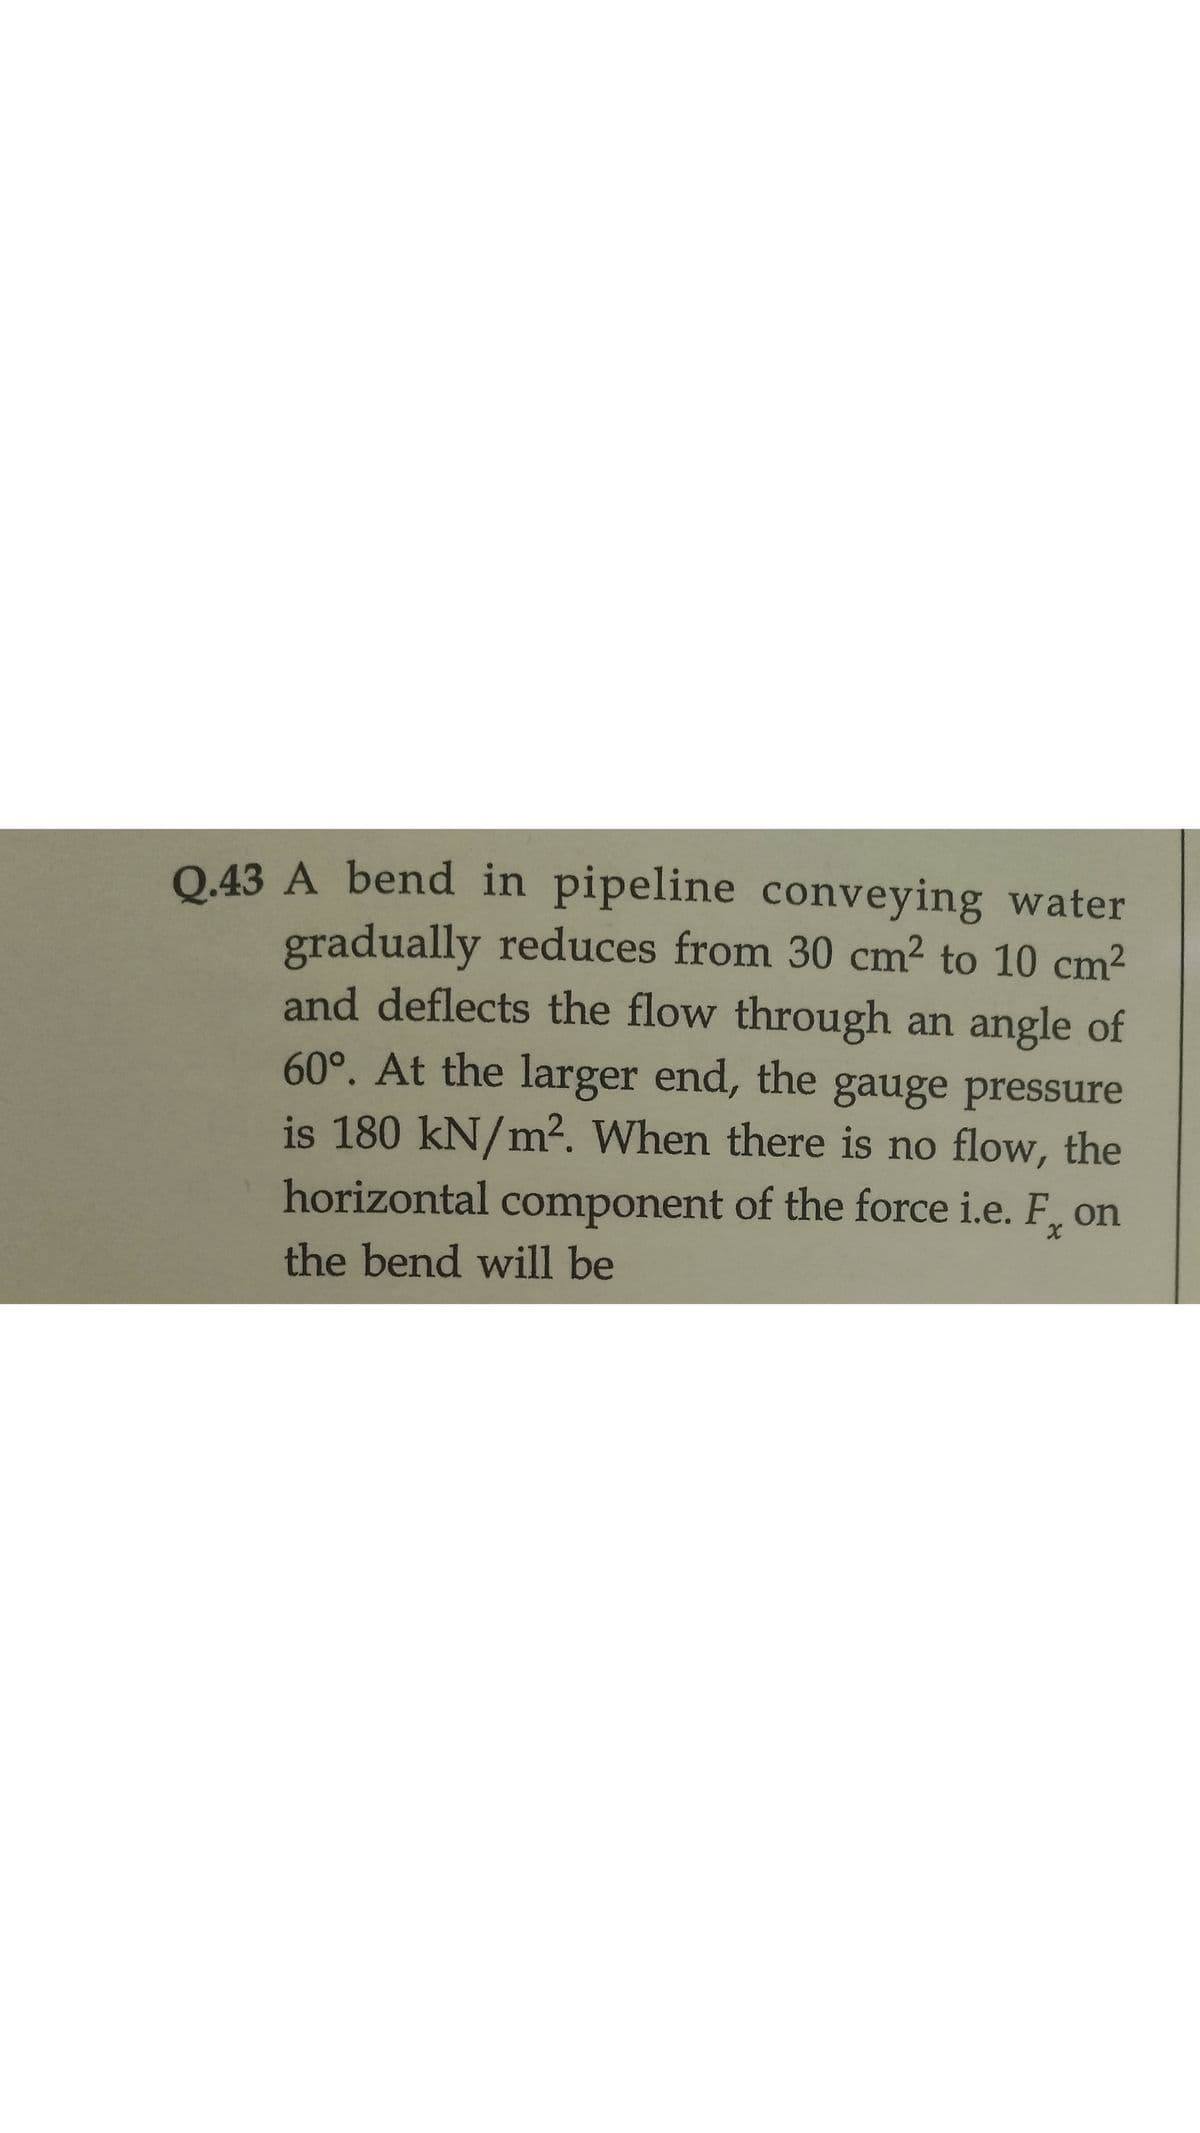 Q.43 A bend in pipeline conveying water
gradually reduces from 30 cm2 to 10 cm2
and deflects the flow through an angle of
60°. At the larger end, the gauge pressure
is 180 kN/m². When there is no flow, the
horizontal component of the force i.e. F,
on
the bend will be
